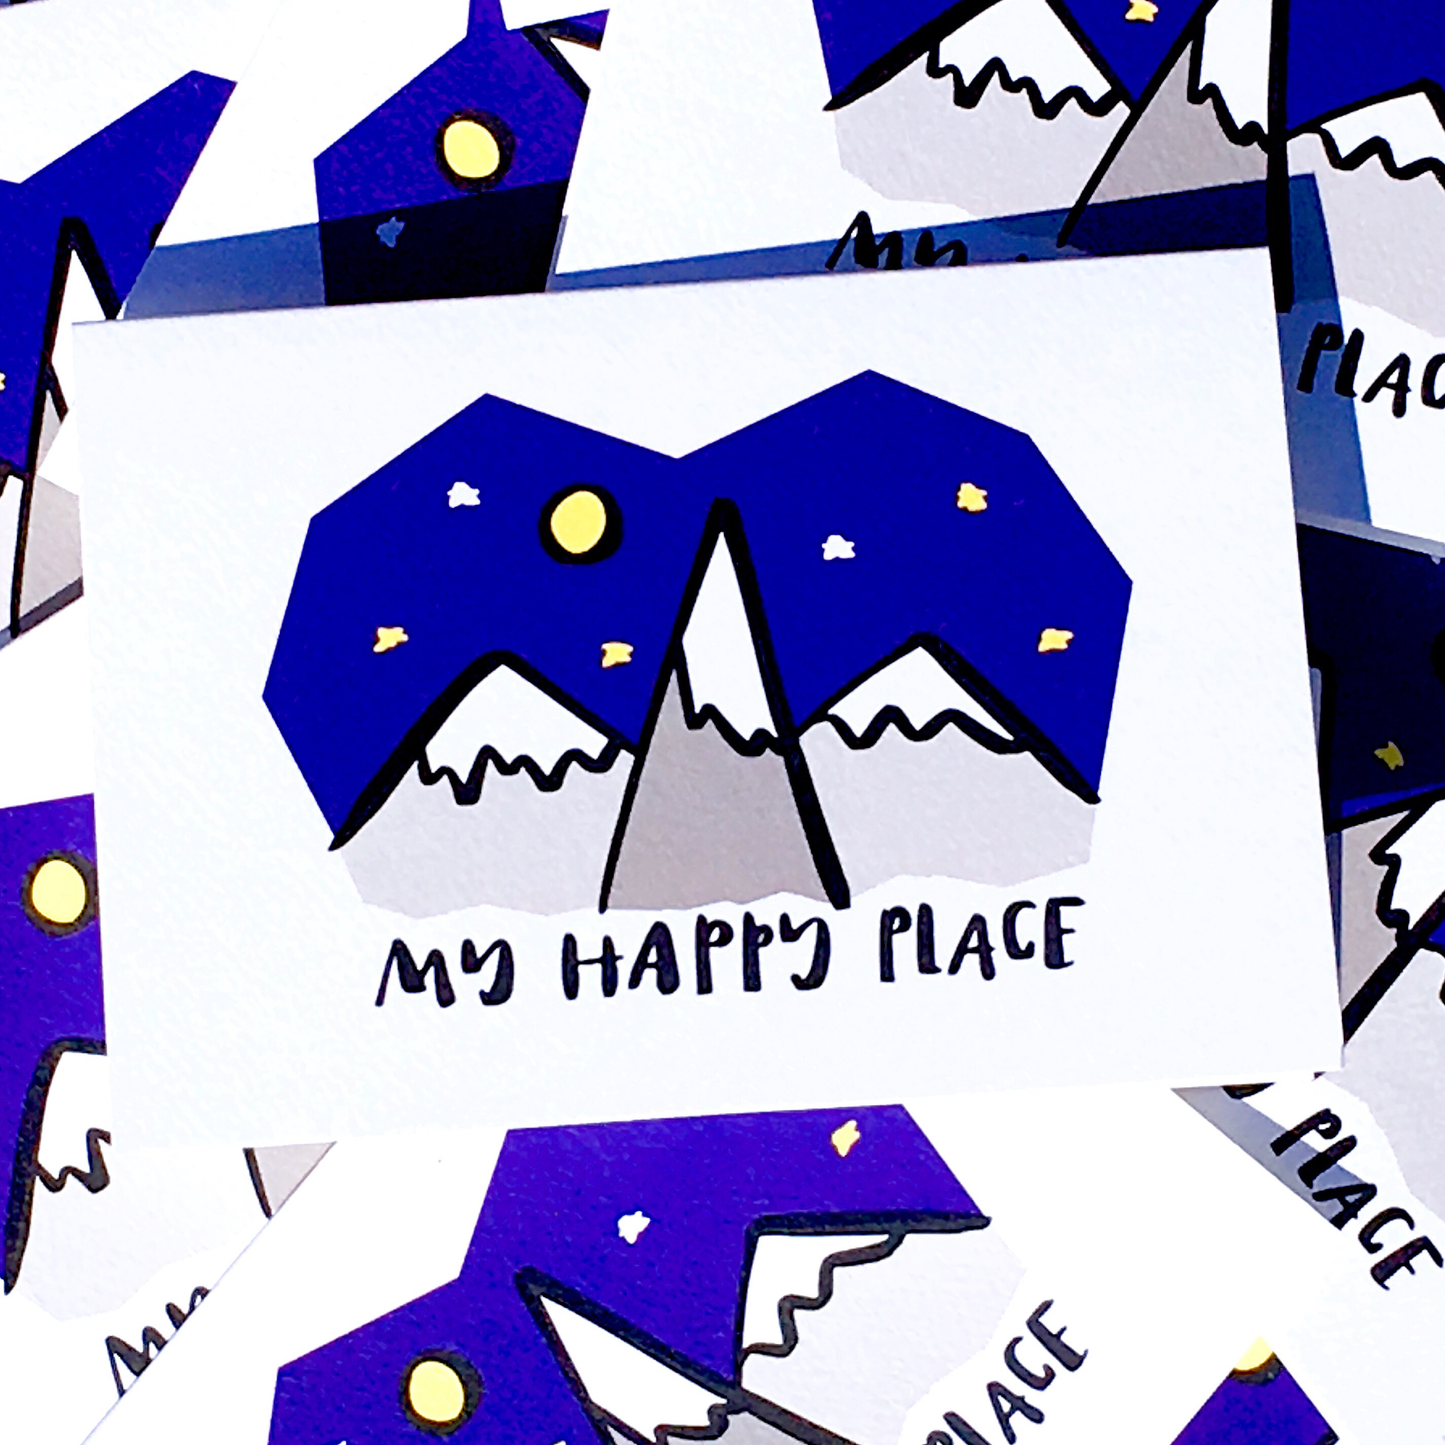 MOUNTAIN HAPPY PLACE CARD